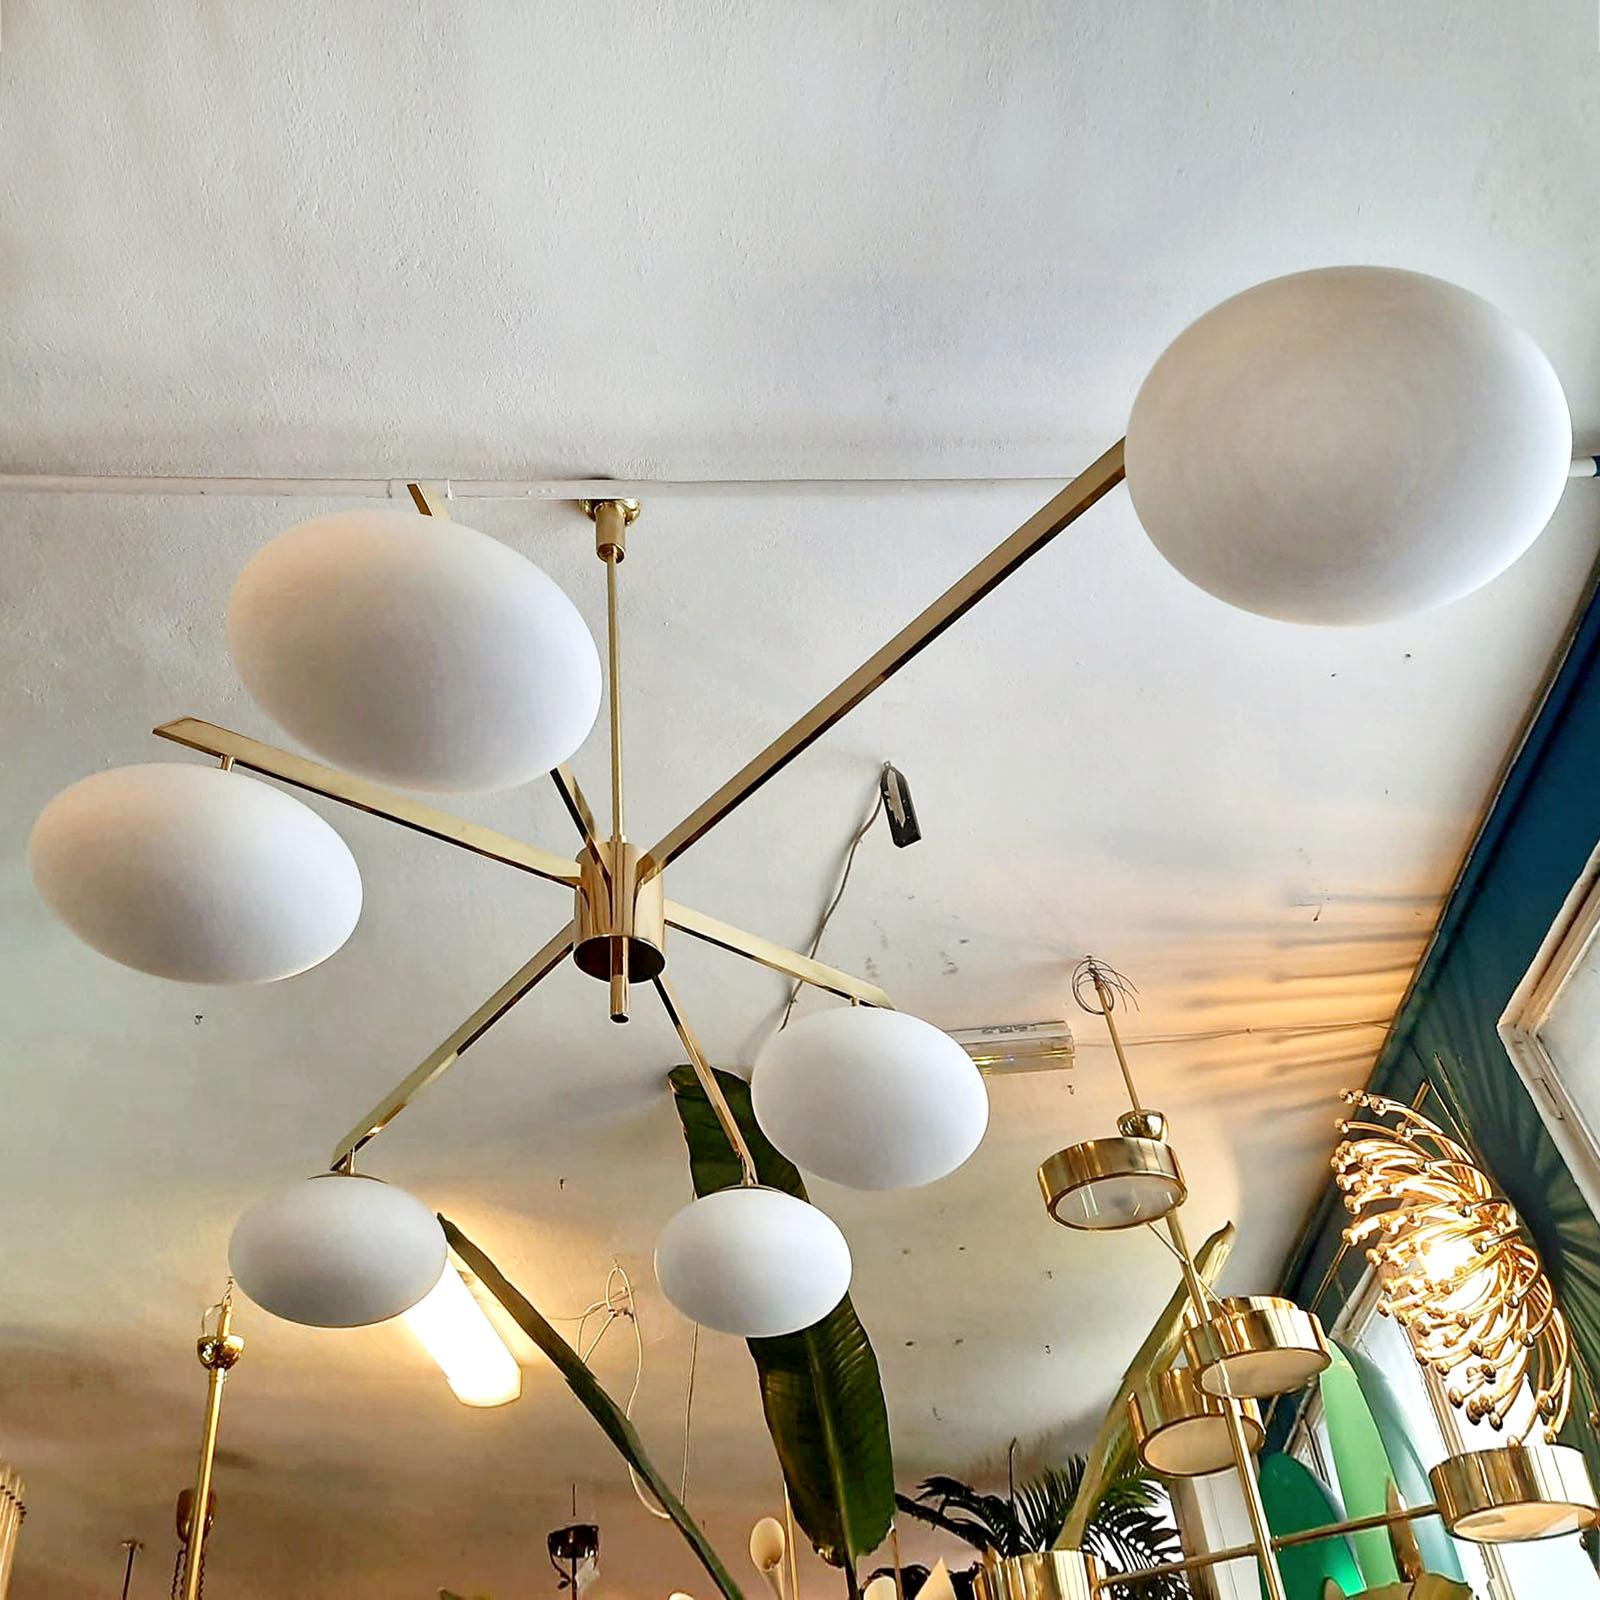 Made after a design by Angelo Lelli, in the mid century Italian style, this beautiful ceiling fixture impress by its lines simplicity and clean design. Made of brass and with opaque glass rounded shades, it throws a strong, yet diffuse light in the